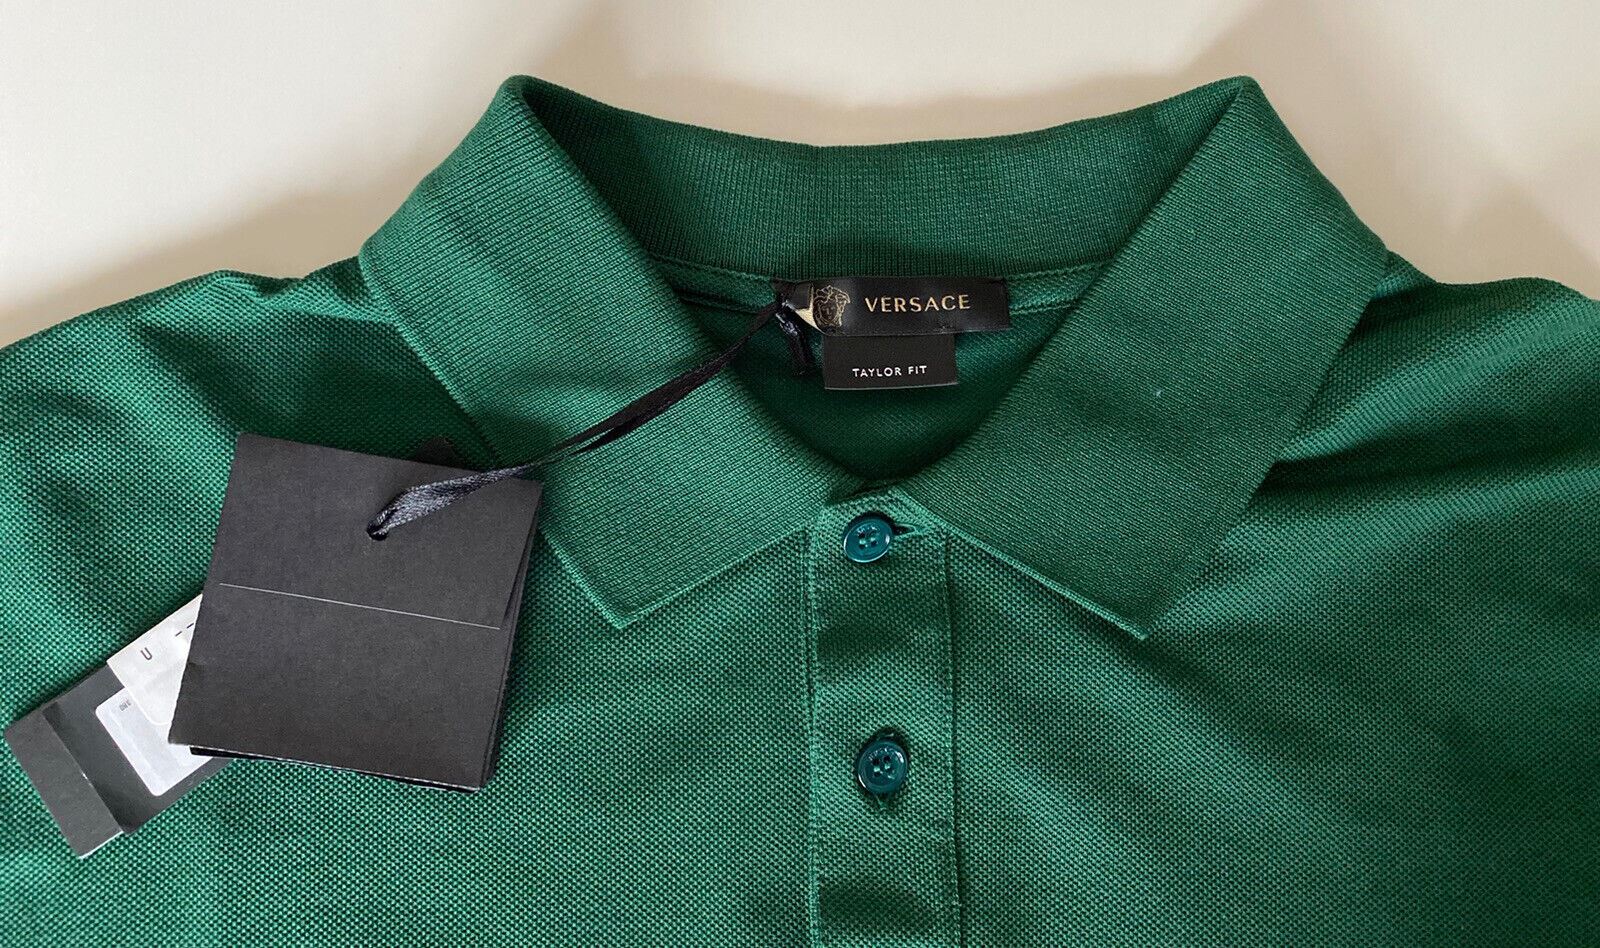 NWT $650 Versace Blue Striped Tailor Fit Cotton Polo Shirt Medium A84992